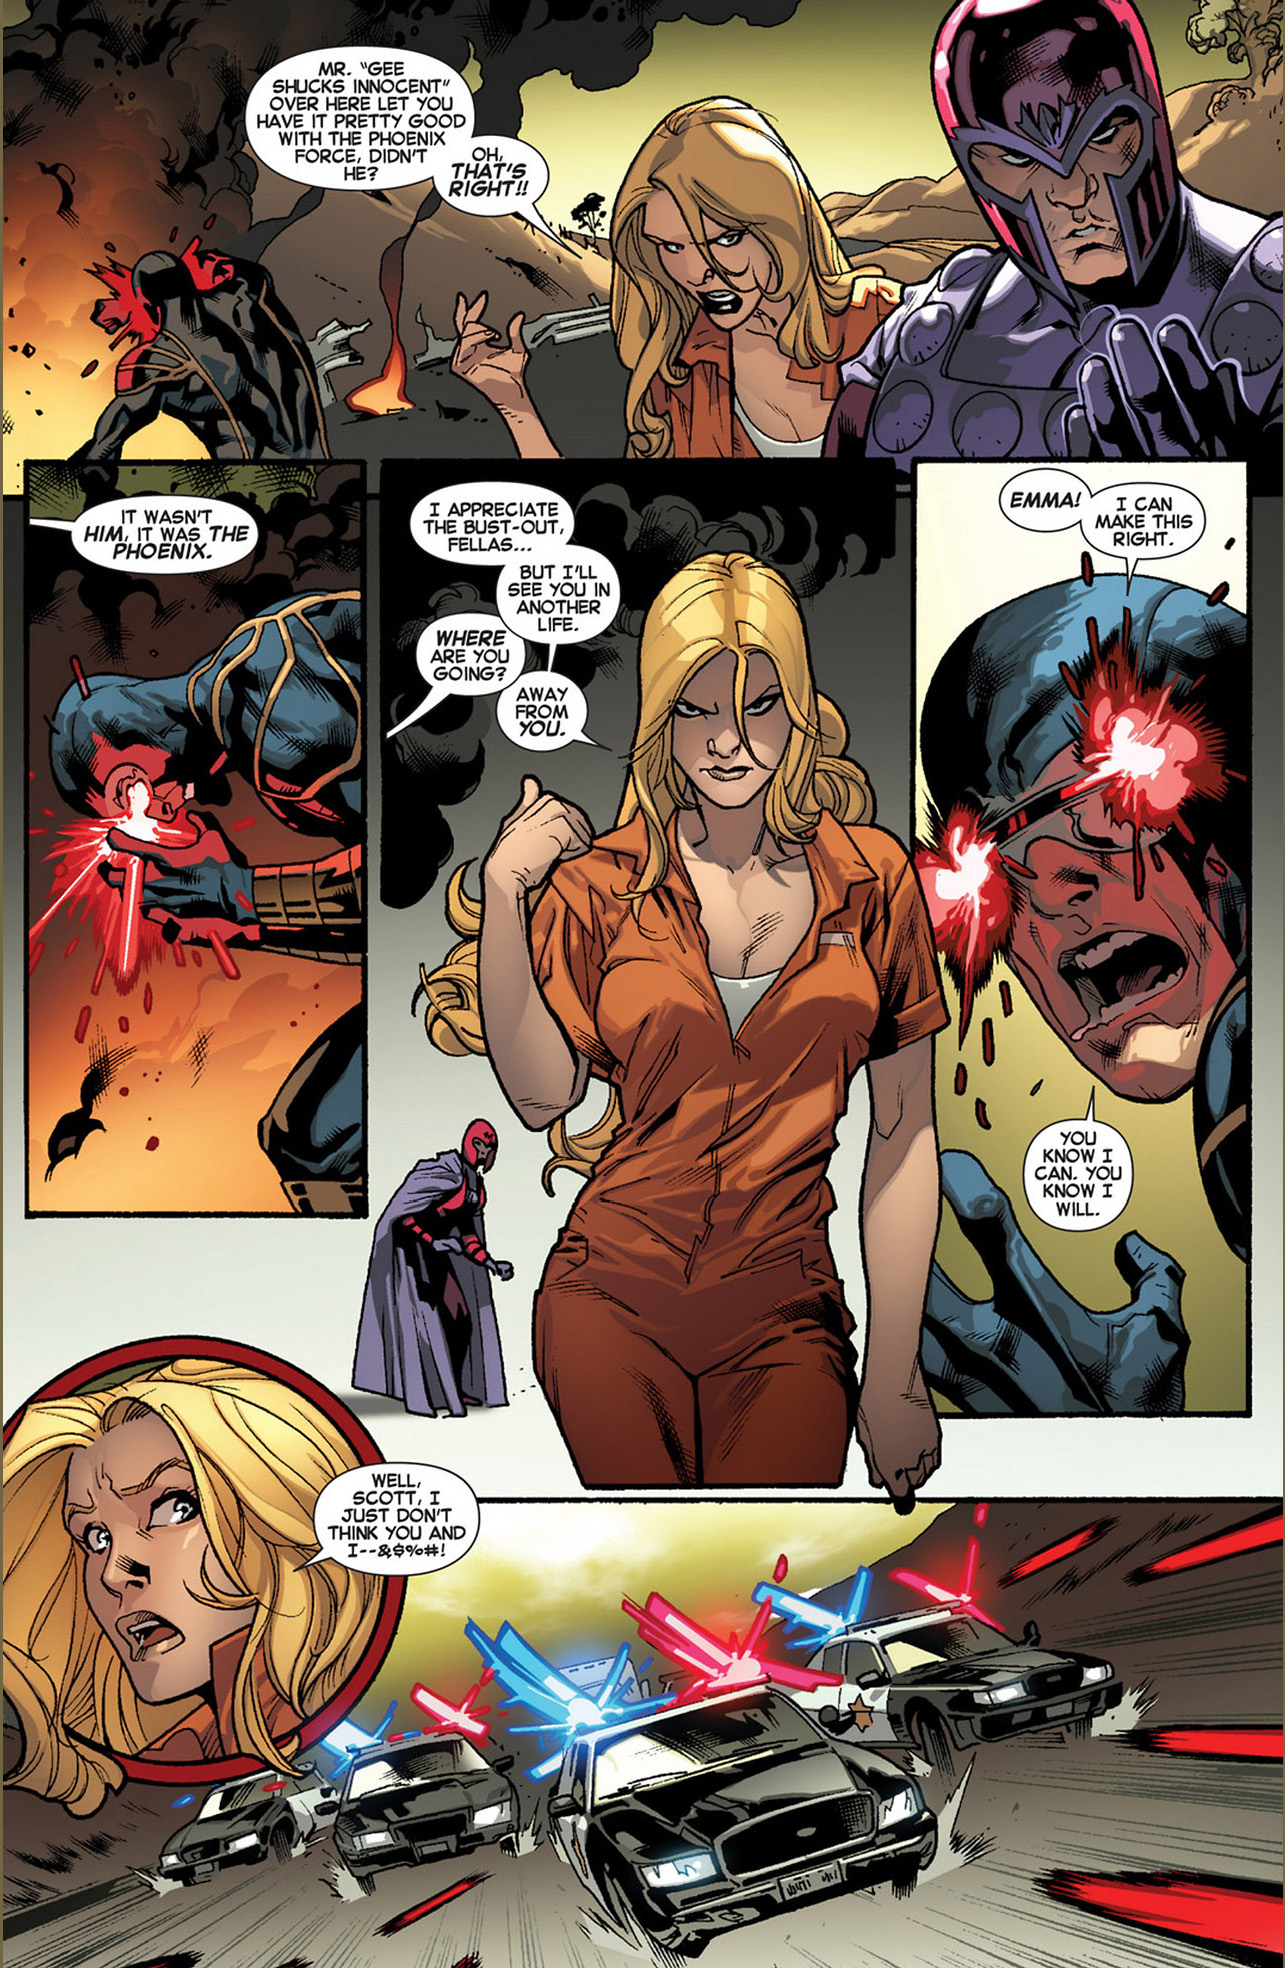 why-cyclops-emma-frost-and-magnetos-powers-are-broken-2.jpg